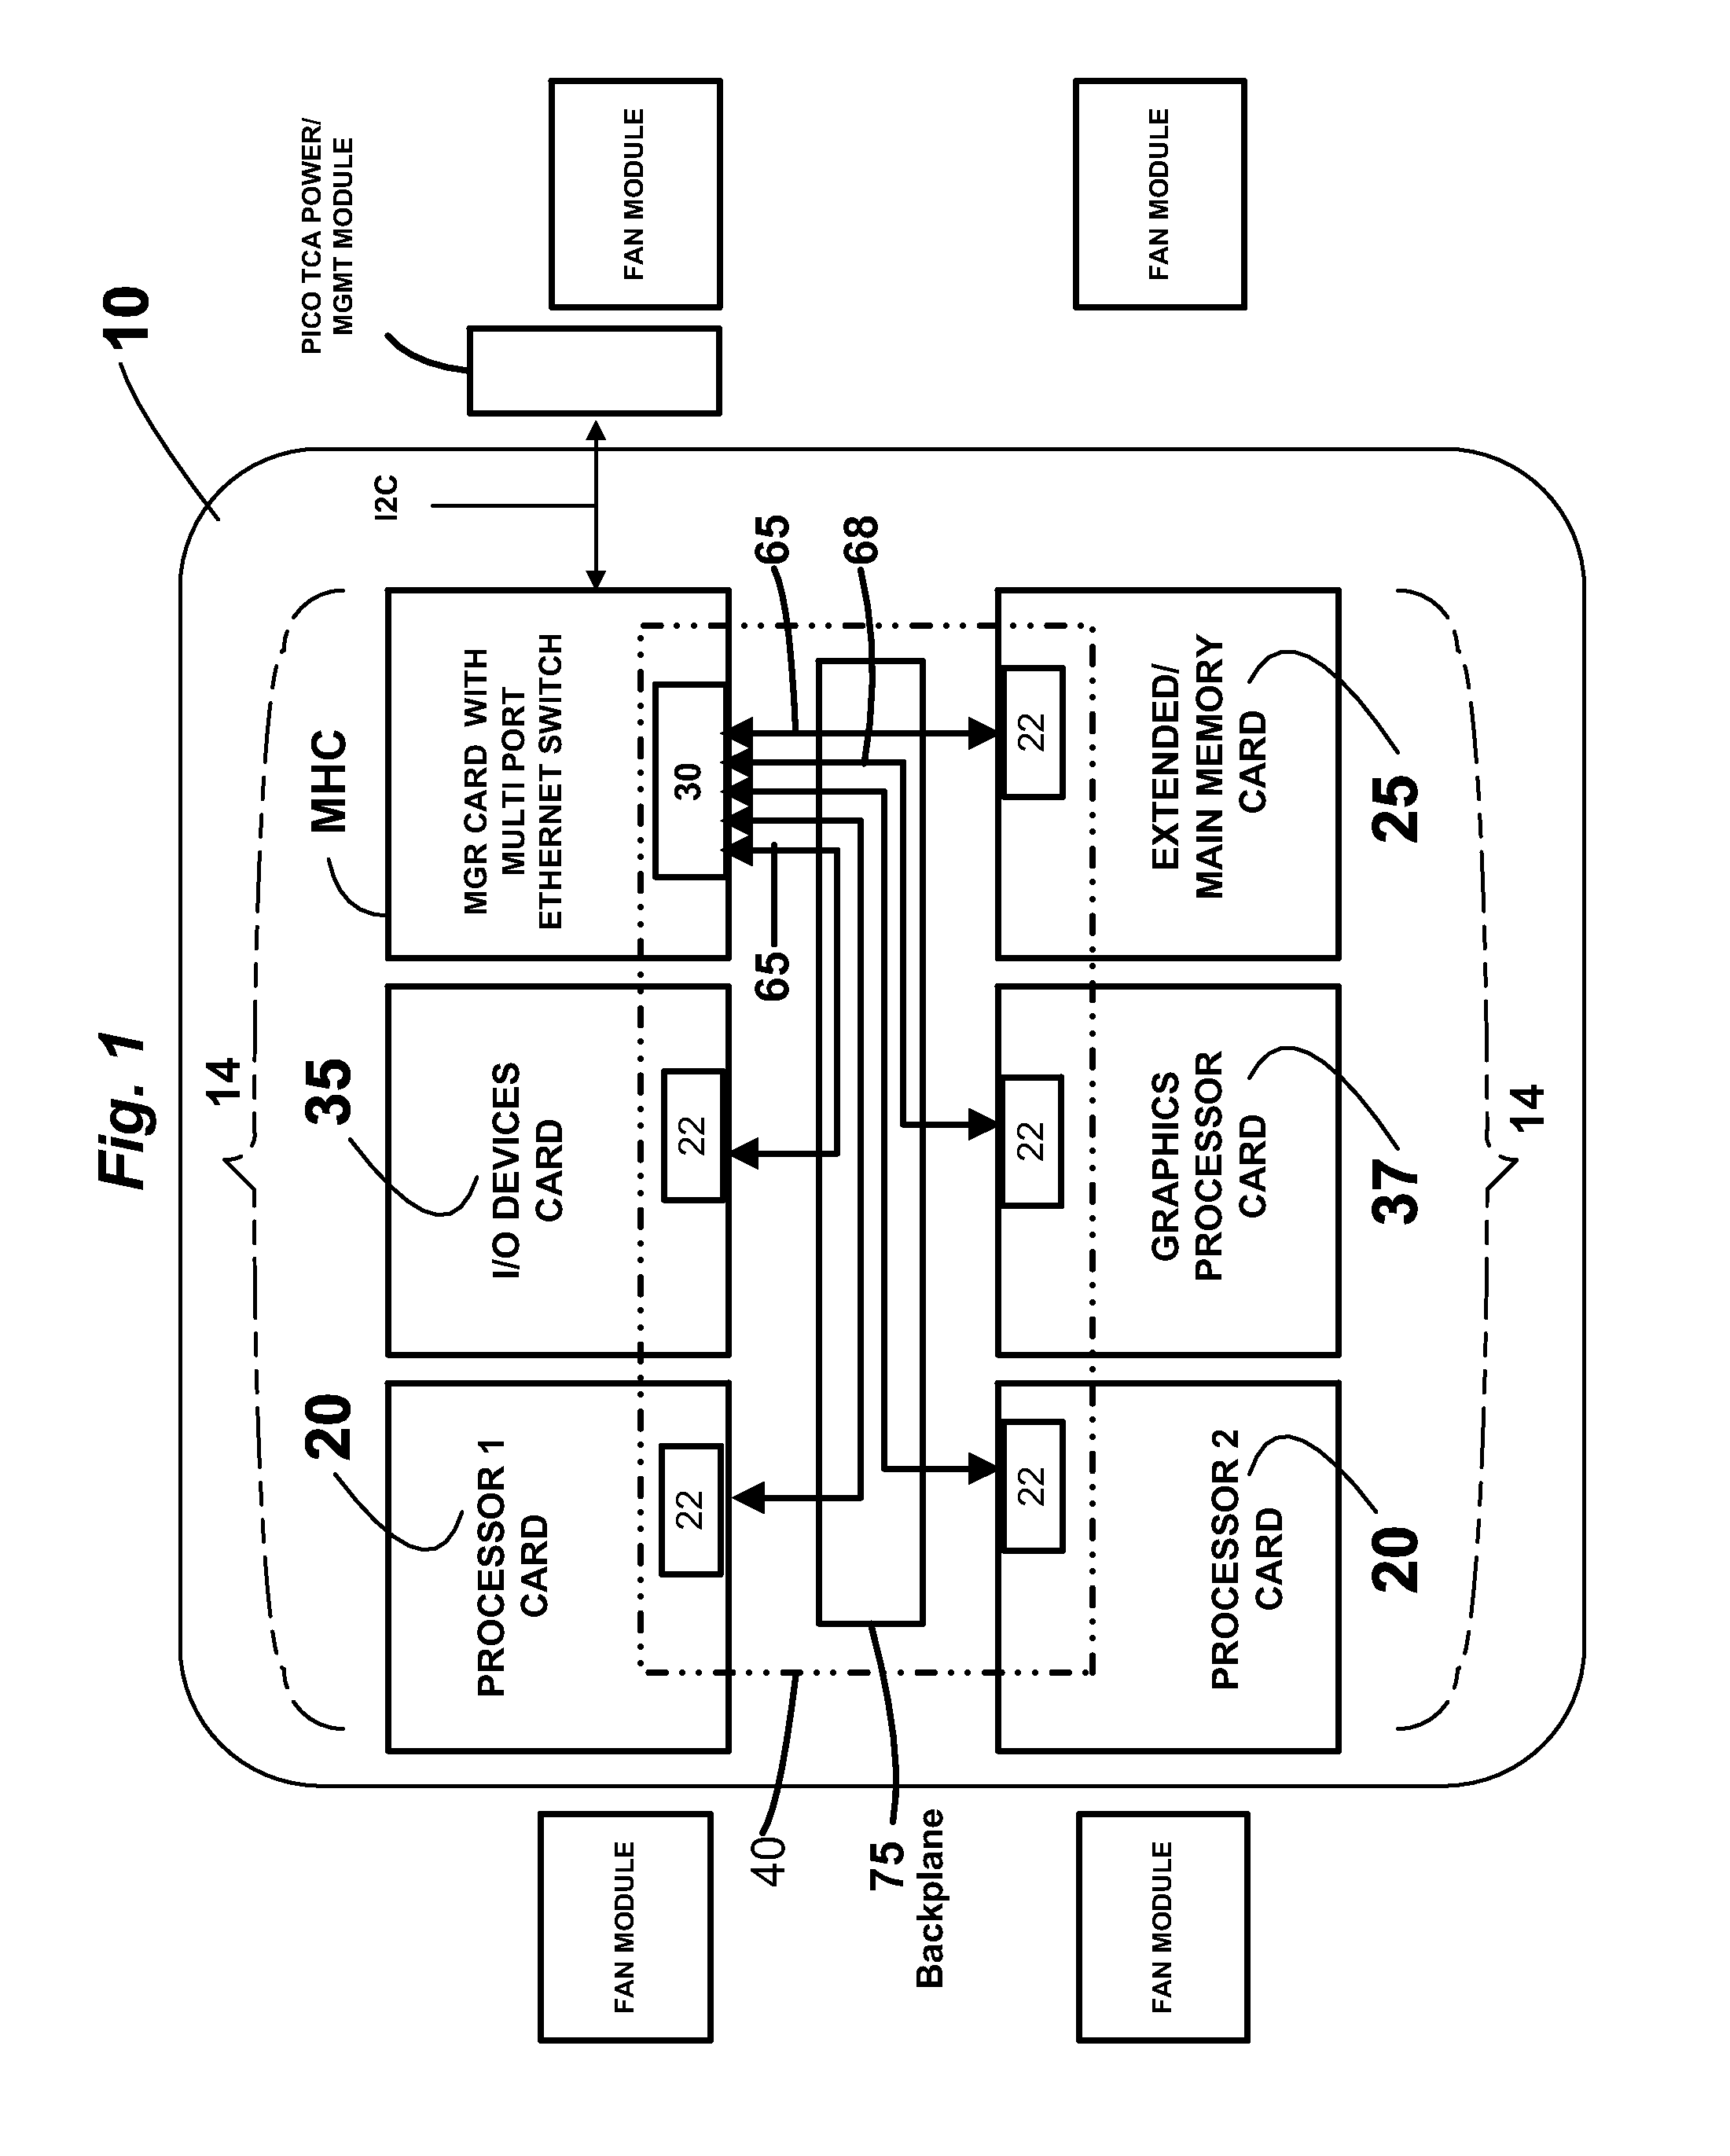 Telecommunication and computing platforms with serial packet switched integrated memory access technology